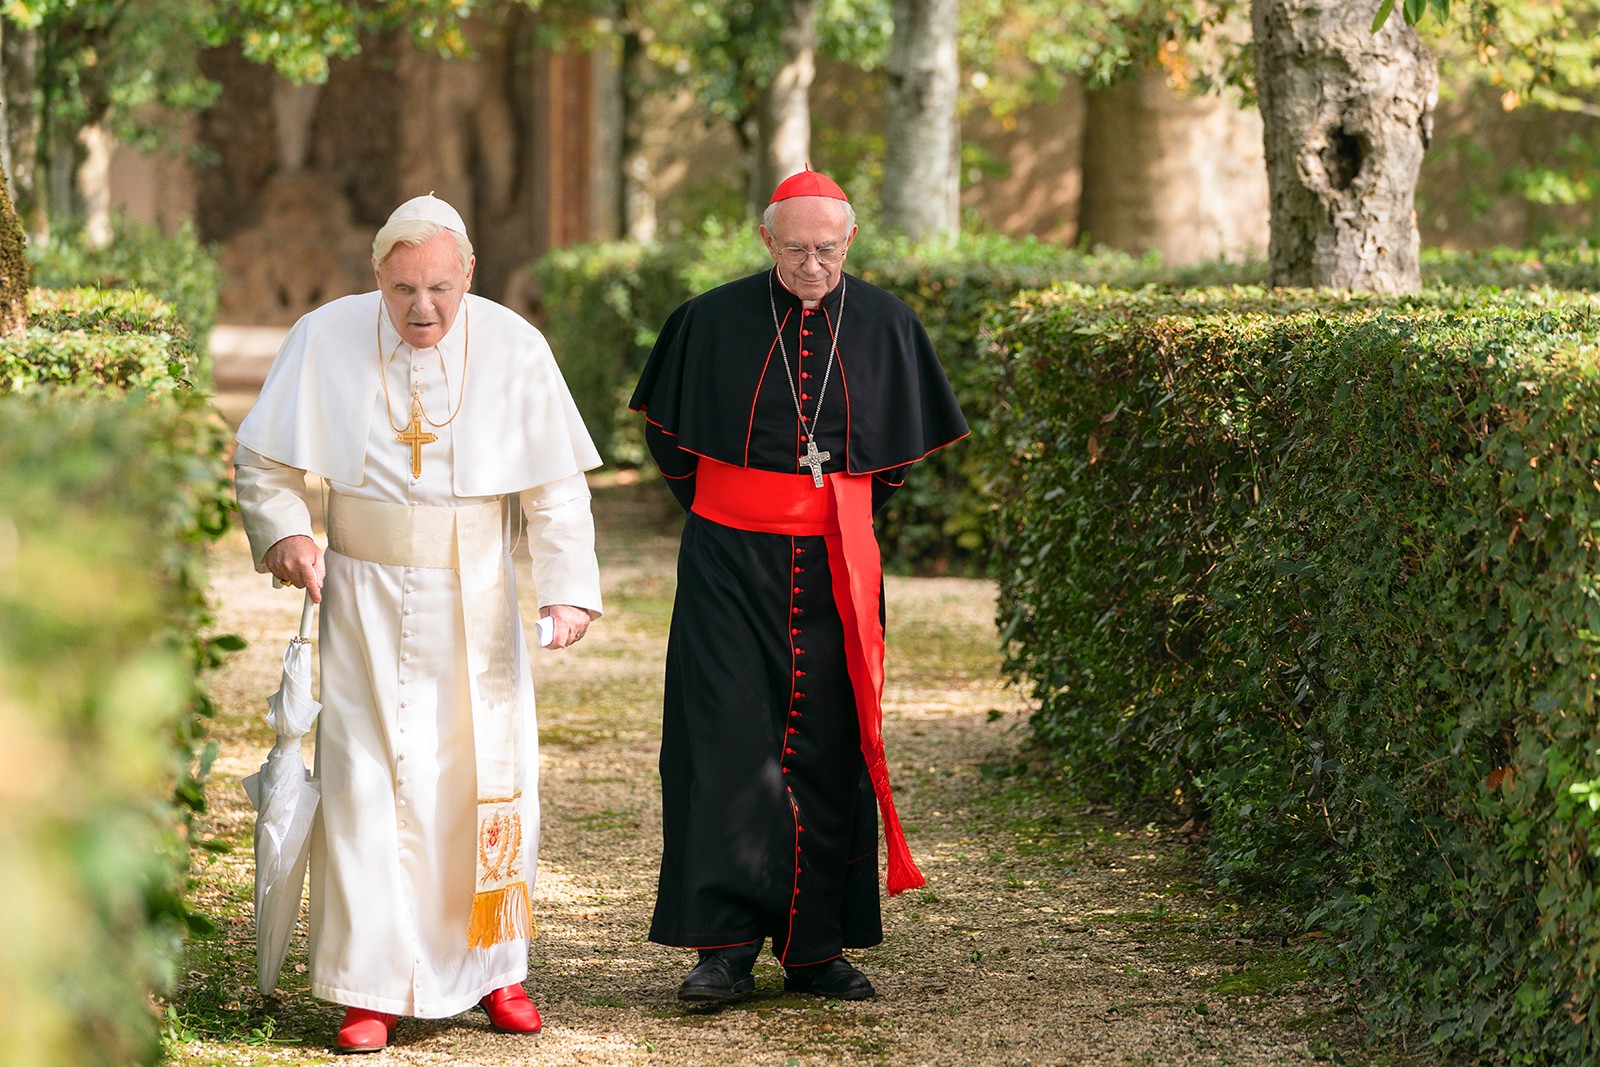 A scene from Netflix’s “The Two Popes”.